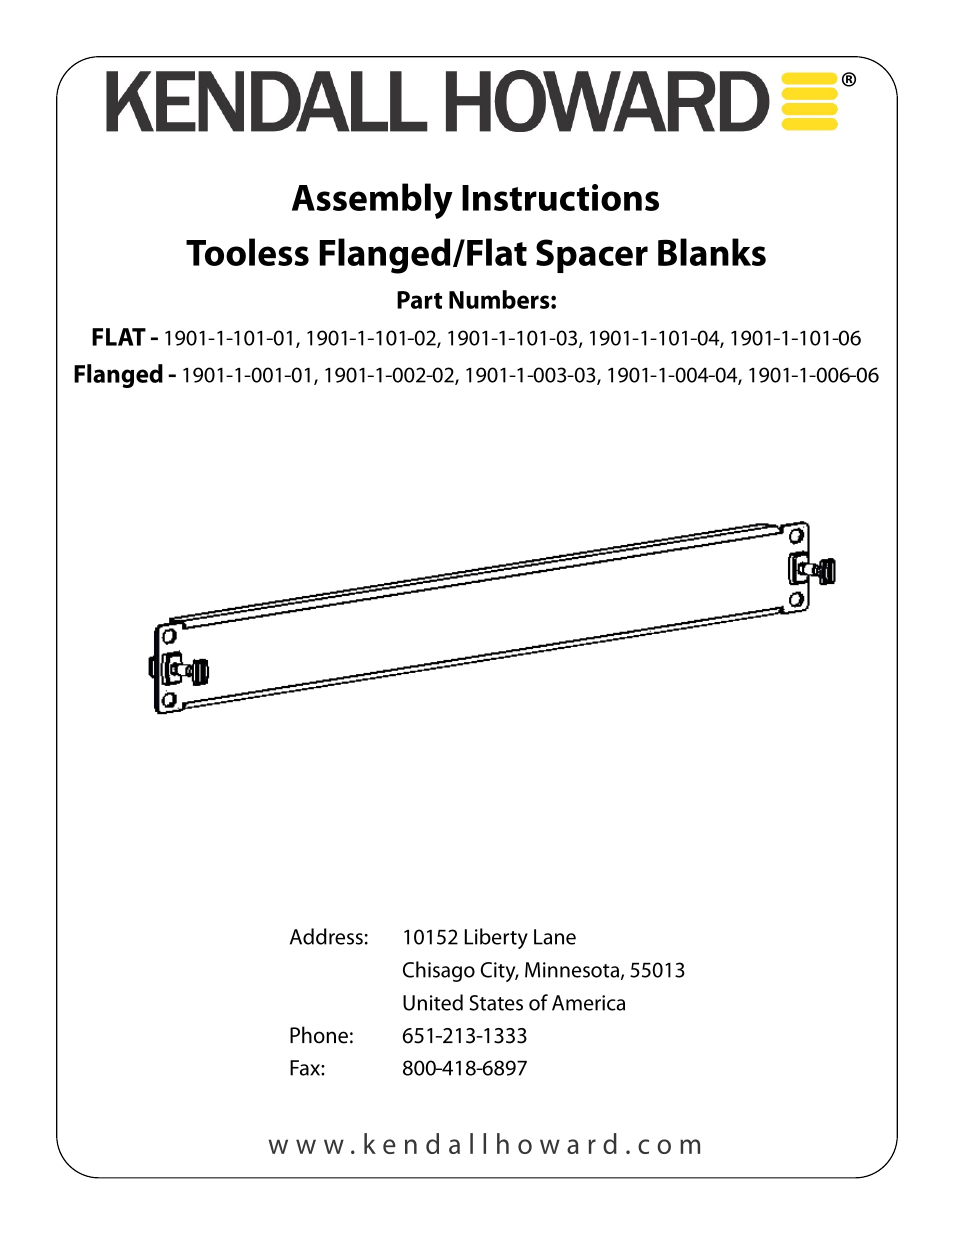 1901-1-101-0x Spacer Blanks